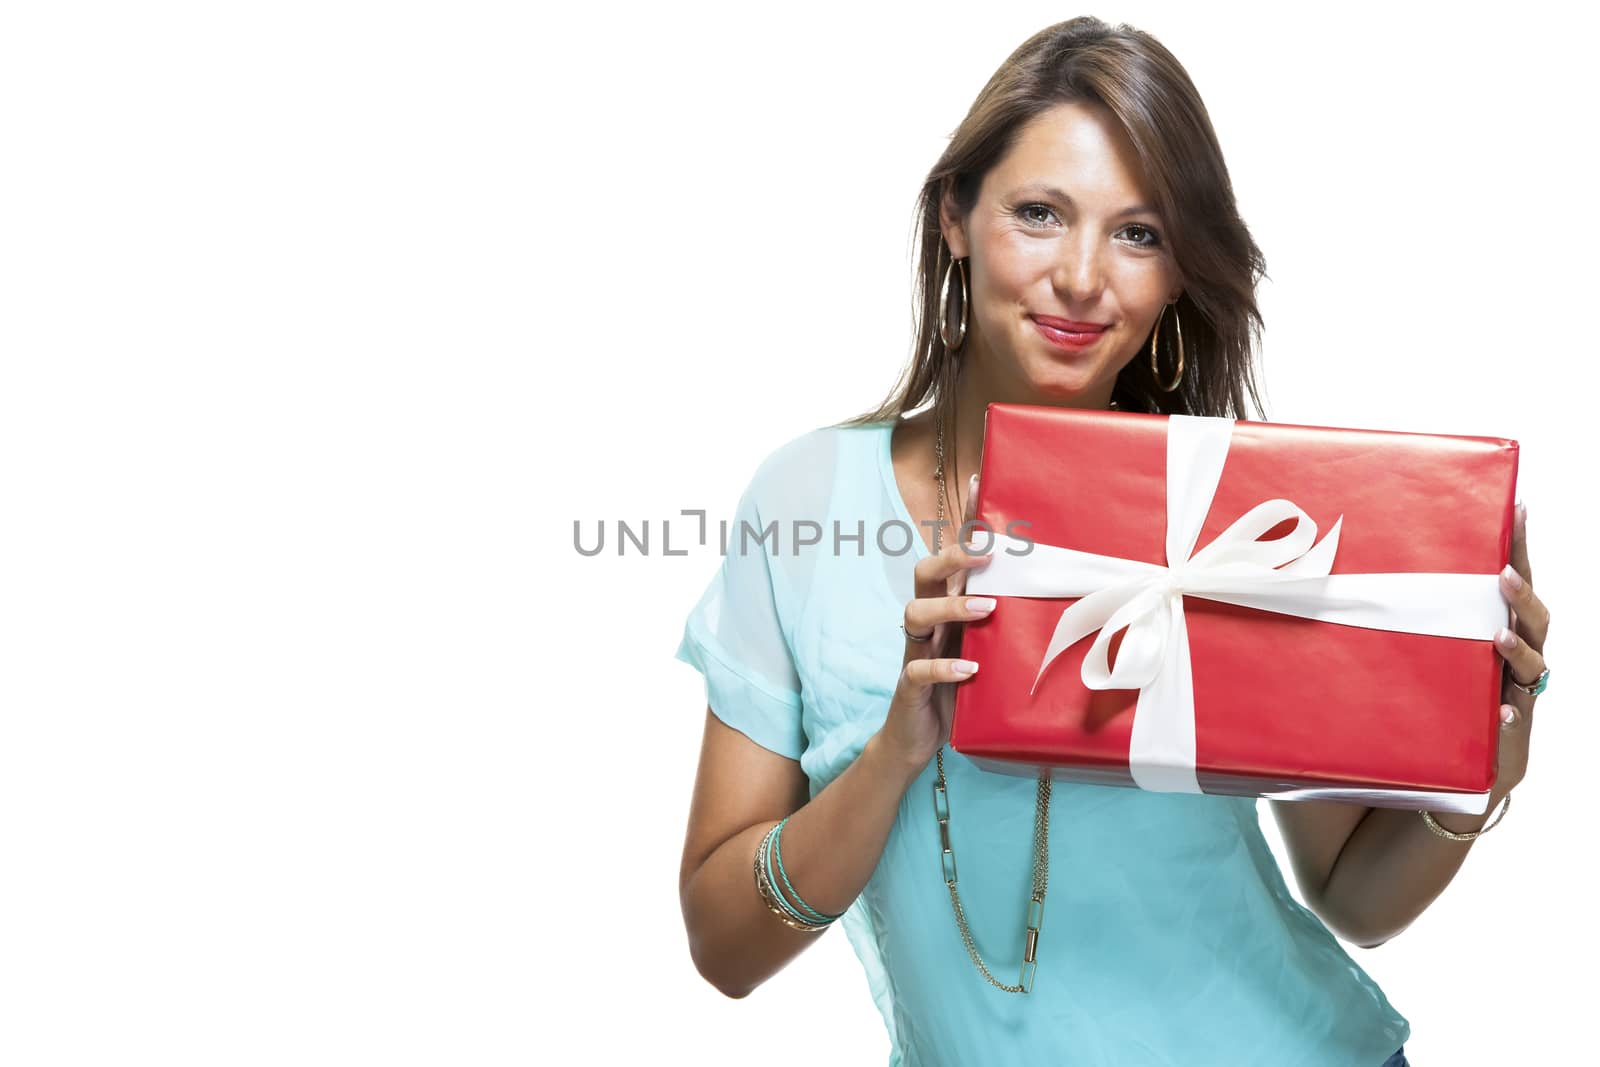 Close up Portrait of Happy Young Woman in Casual Clothing Holding a Red Big Gift Box with White Ribbon While Looking at the Camera. Isolated on White Background.